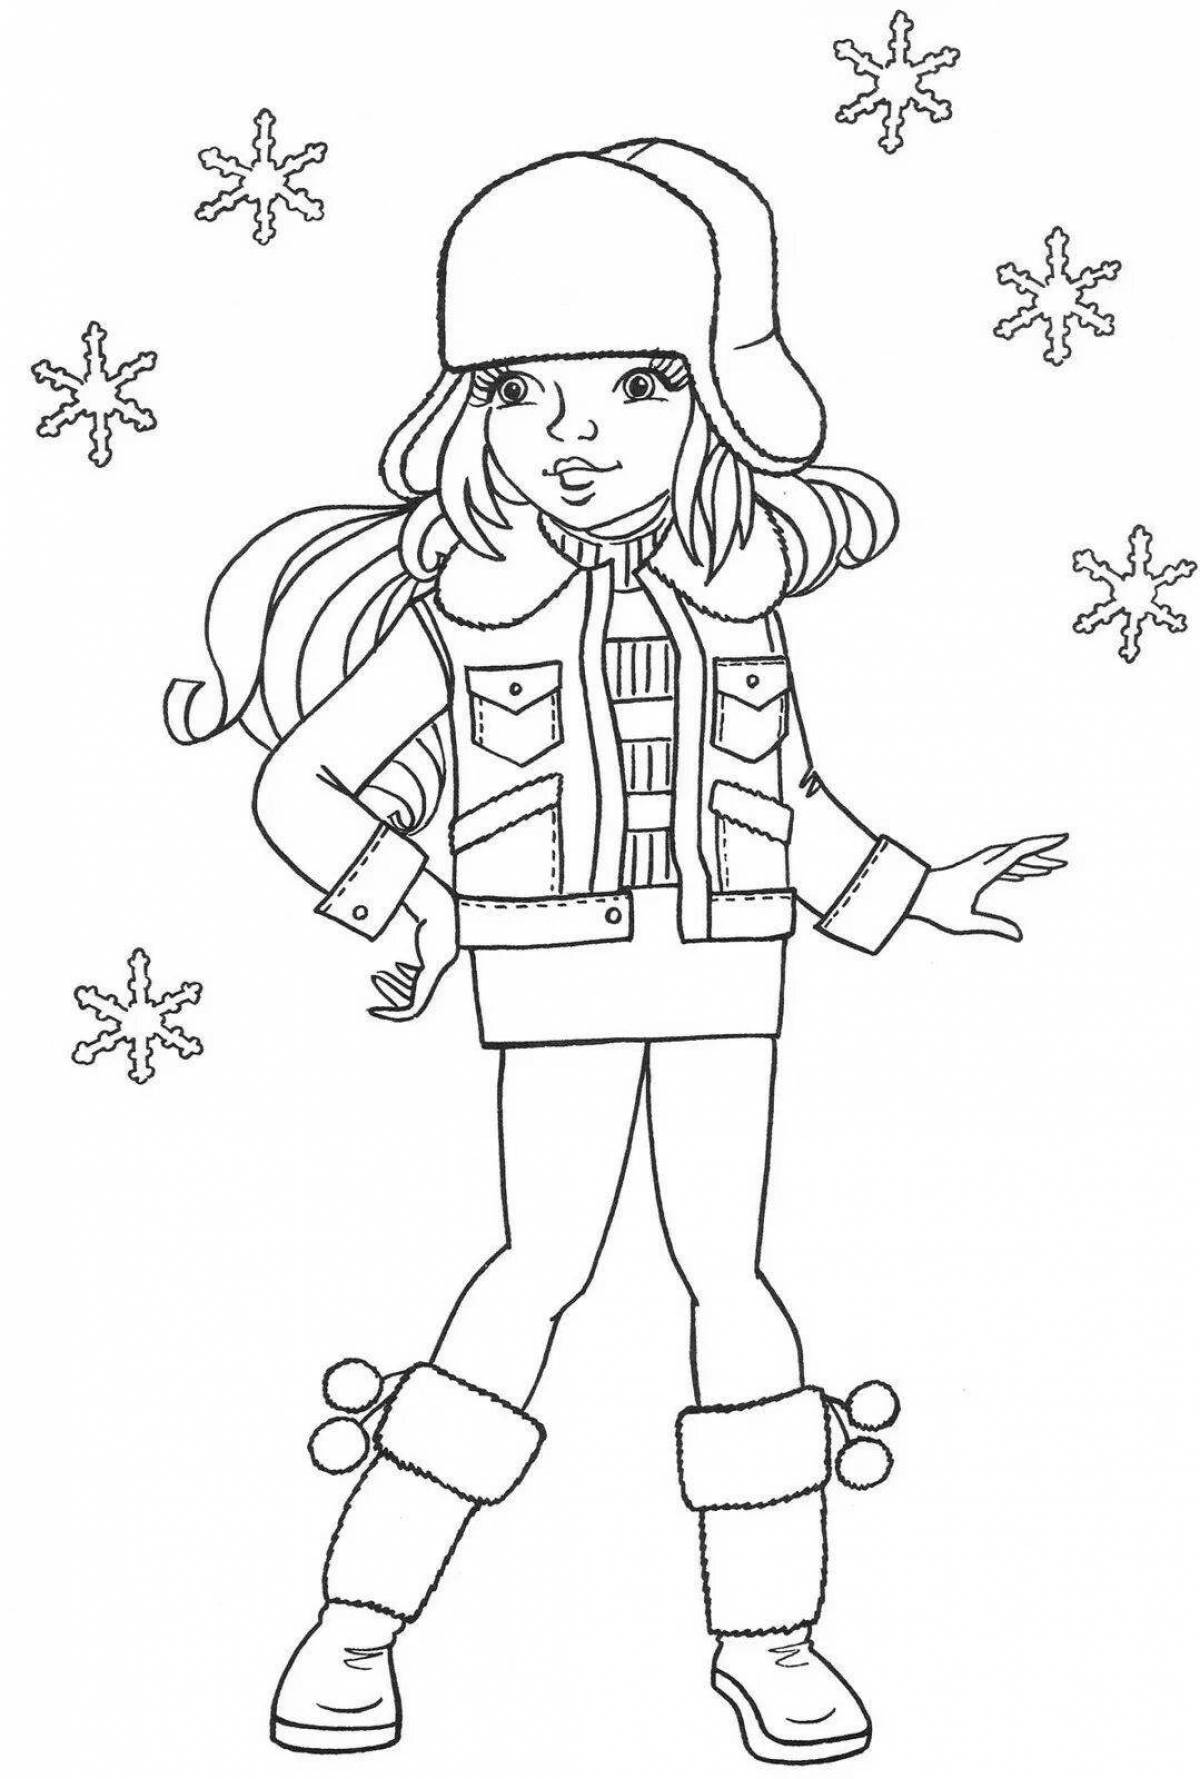 Shiny coloring doll in winter clothes